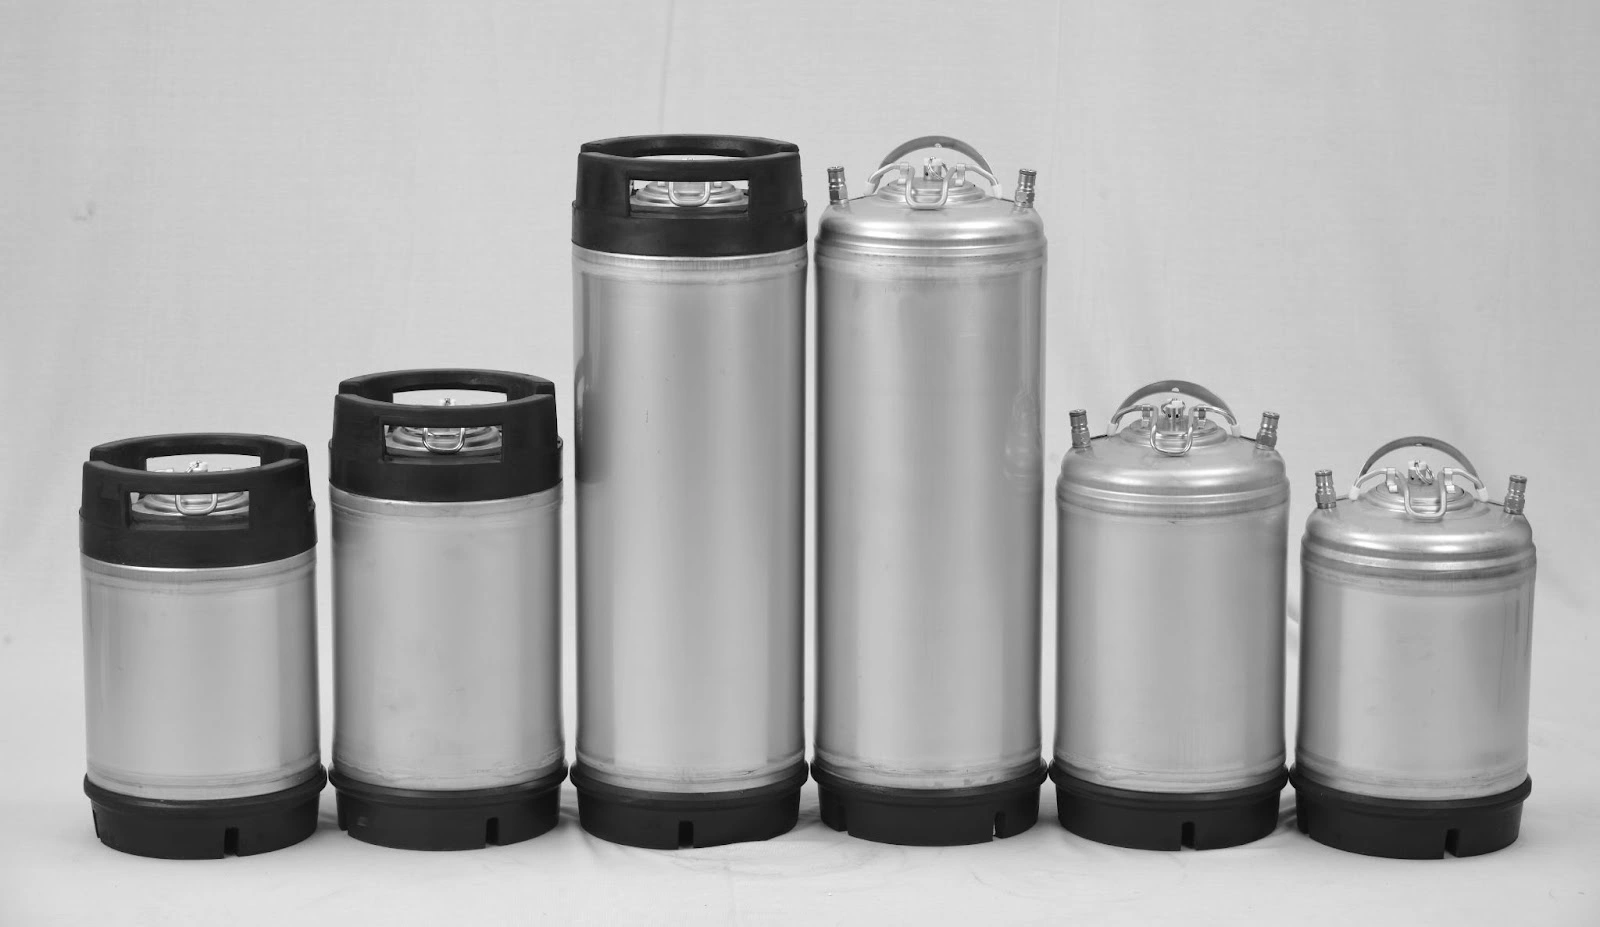 Different types of Corny Kegs in display